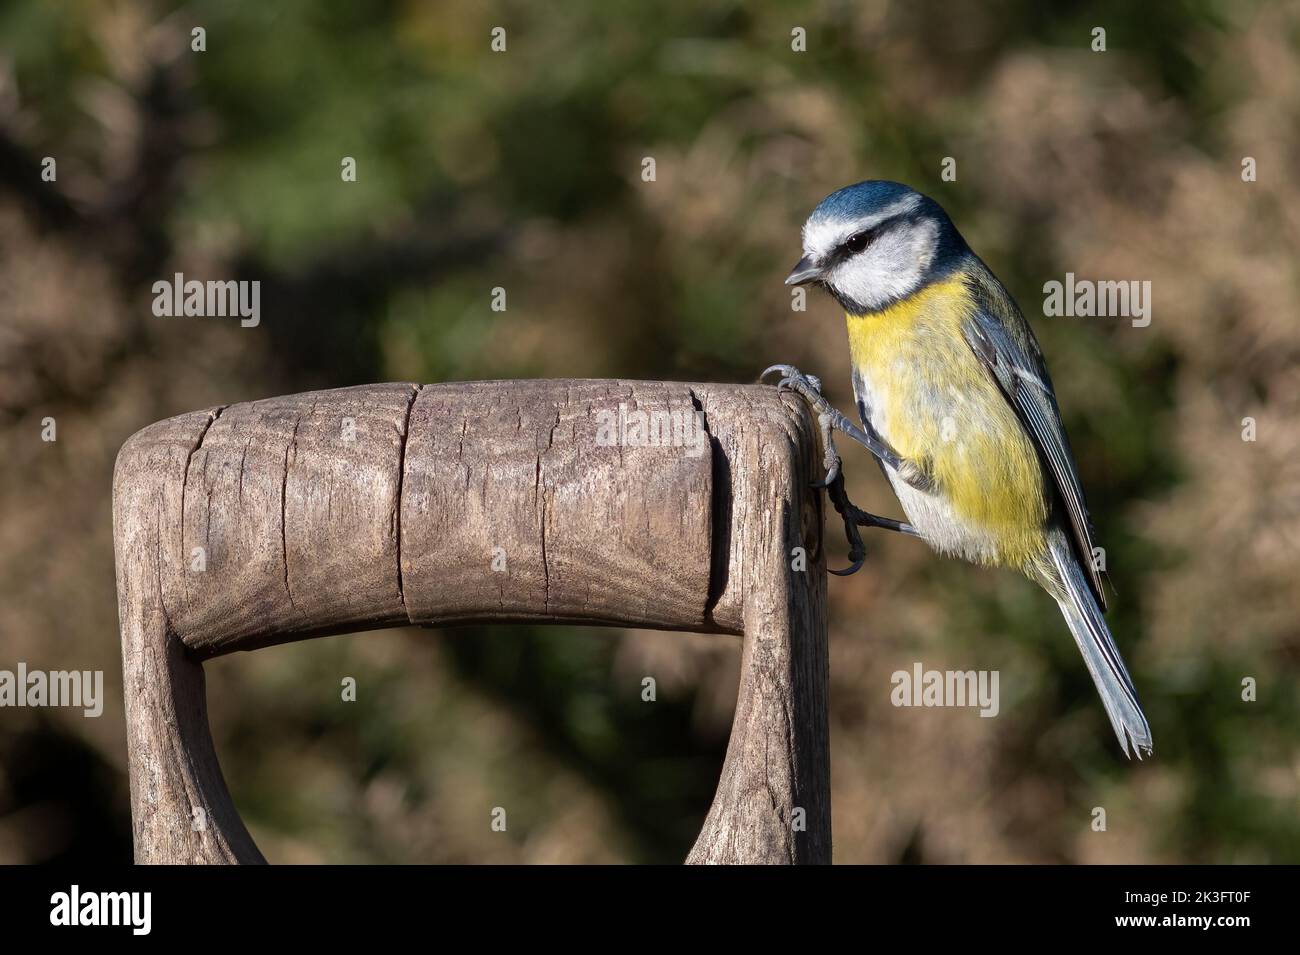 A blue tit, Cyanistes caeruleus, is perched on the side of a wooden fork or spade handle standing in a garden Stock Photo